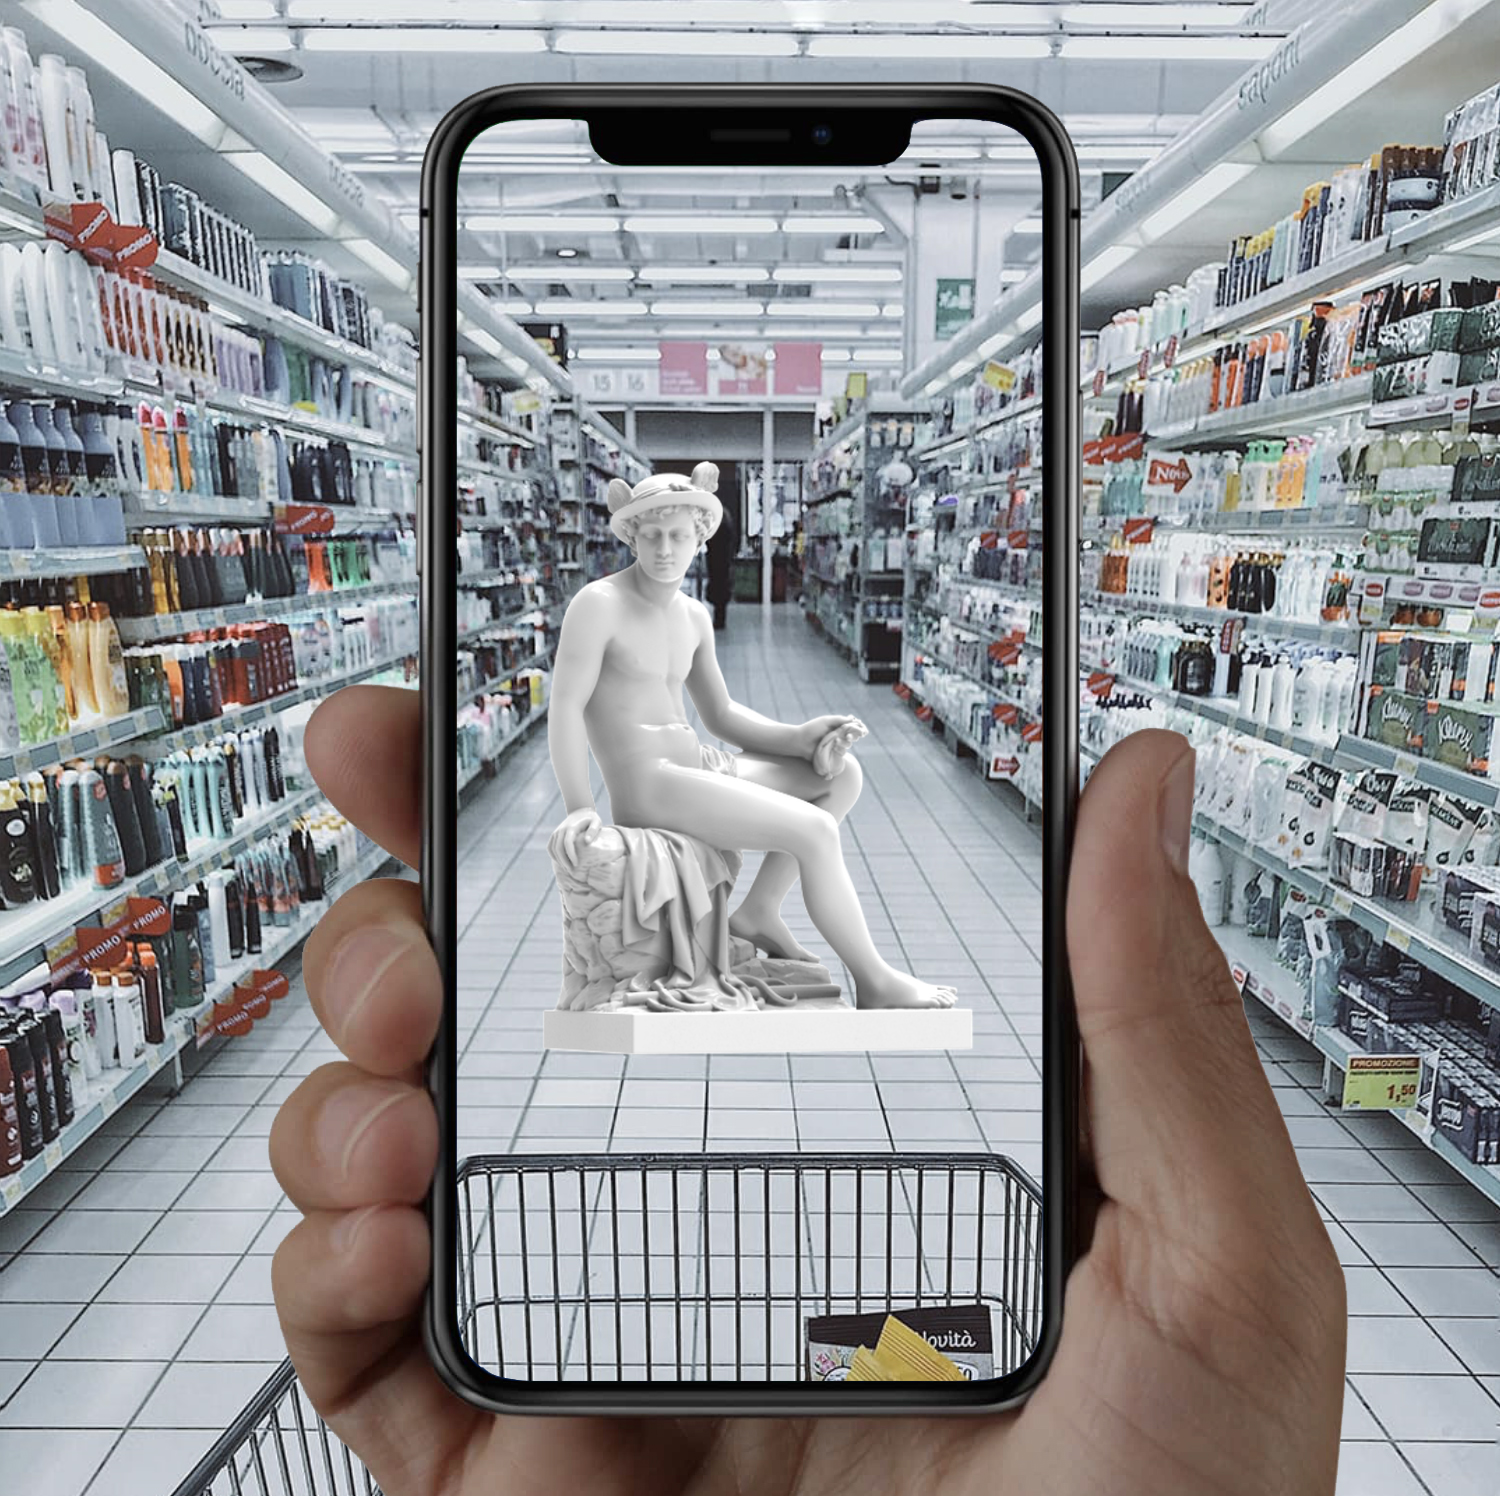 ...on which artists can sell works of art using augmented reality (AR) tech...